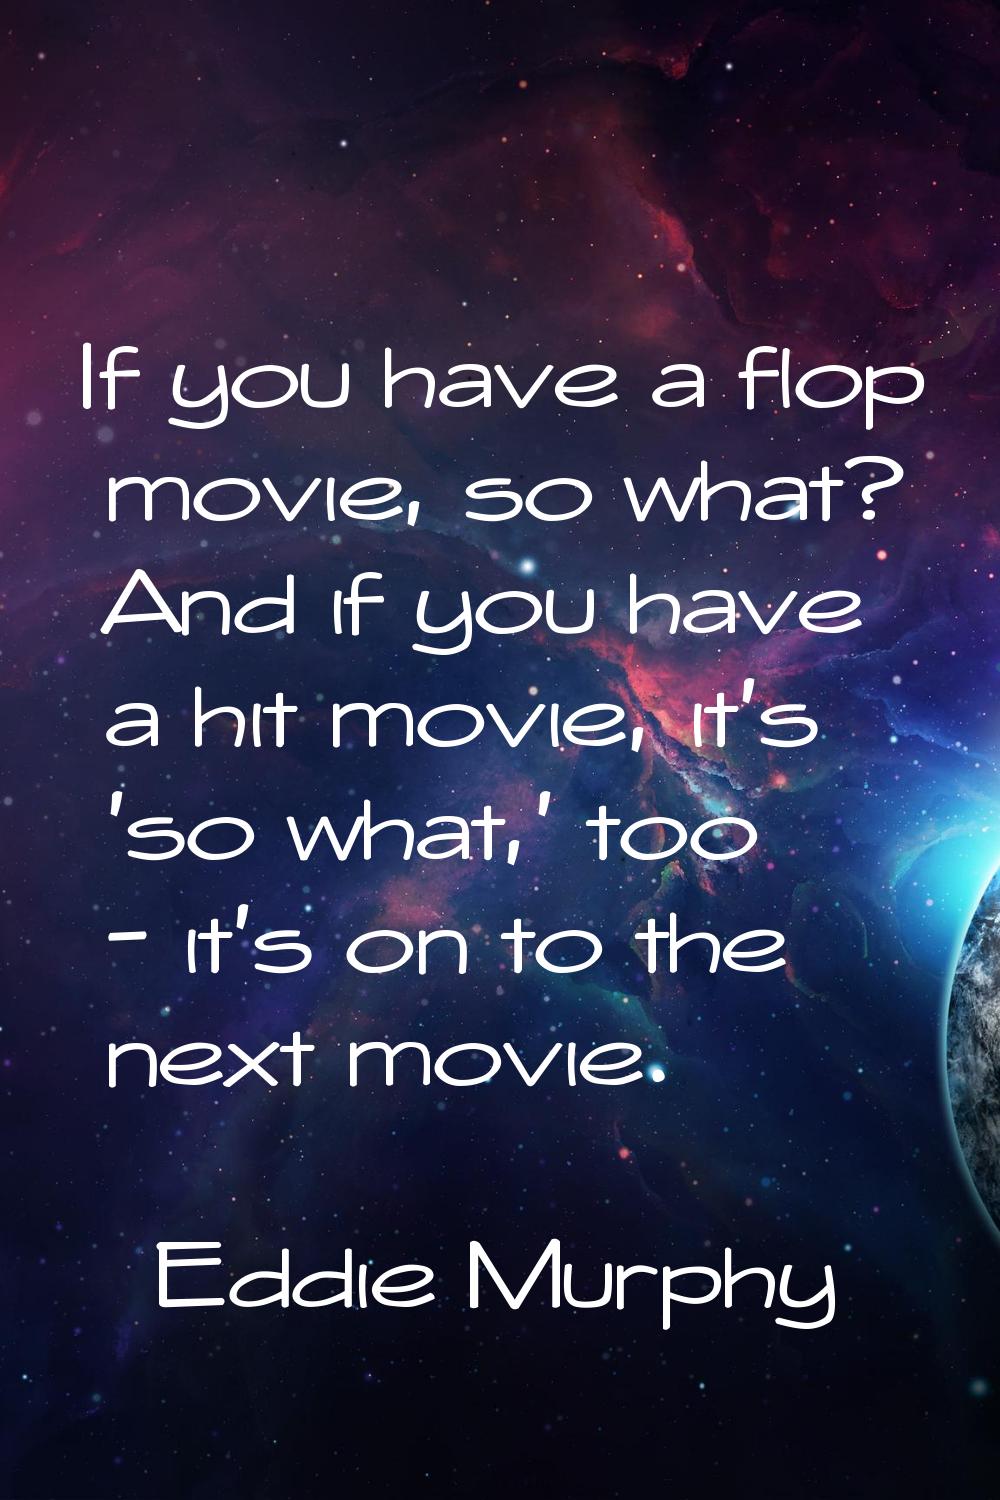 If you have a flop movie, so what? And if you have a hit movie, it's 'so what,' too - it's on to th